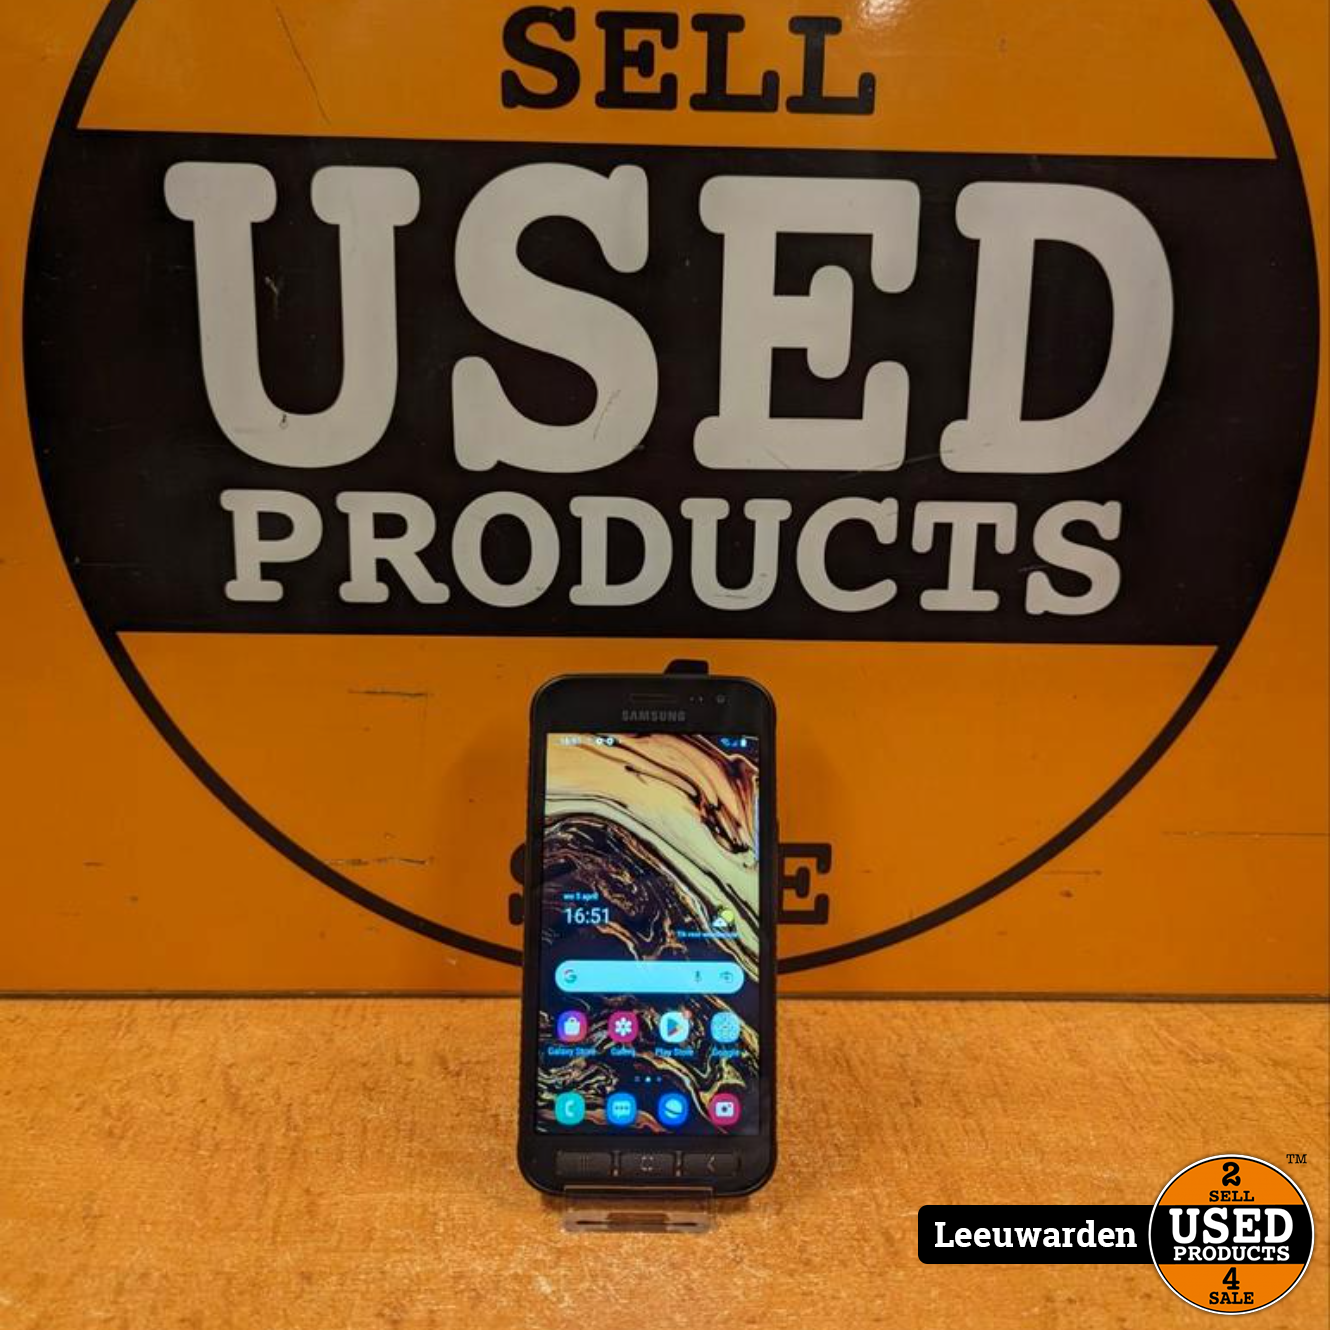 Verzorgen slachtoffers Zeep Samsung Galaxy XCover 4S | 32 GB | 8-Core | Android 11 - Used Products  Leeuwarden